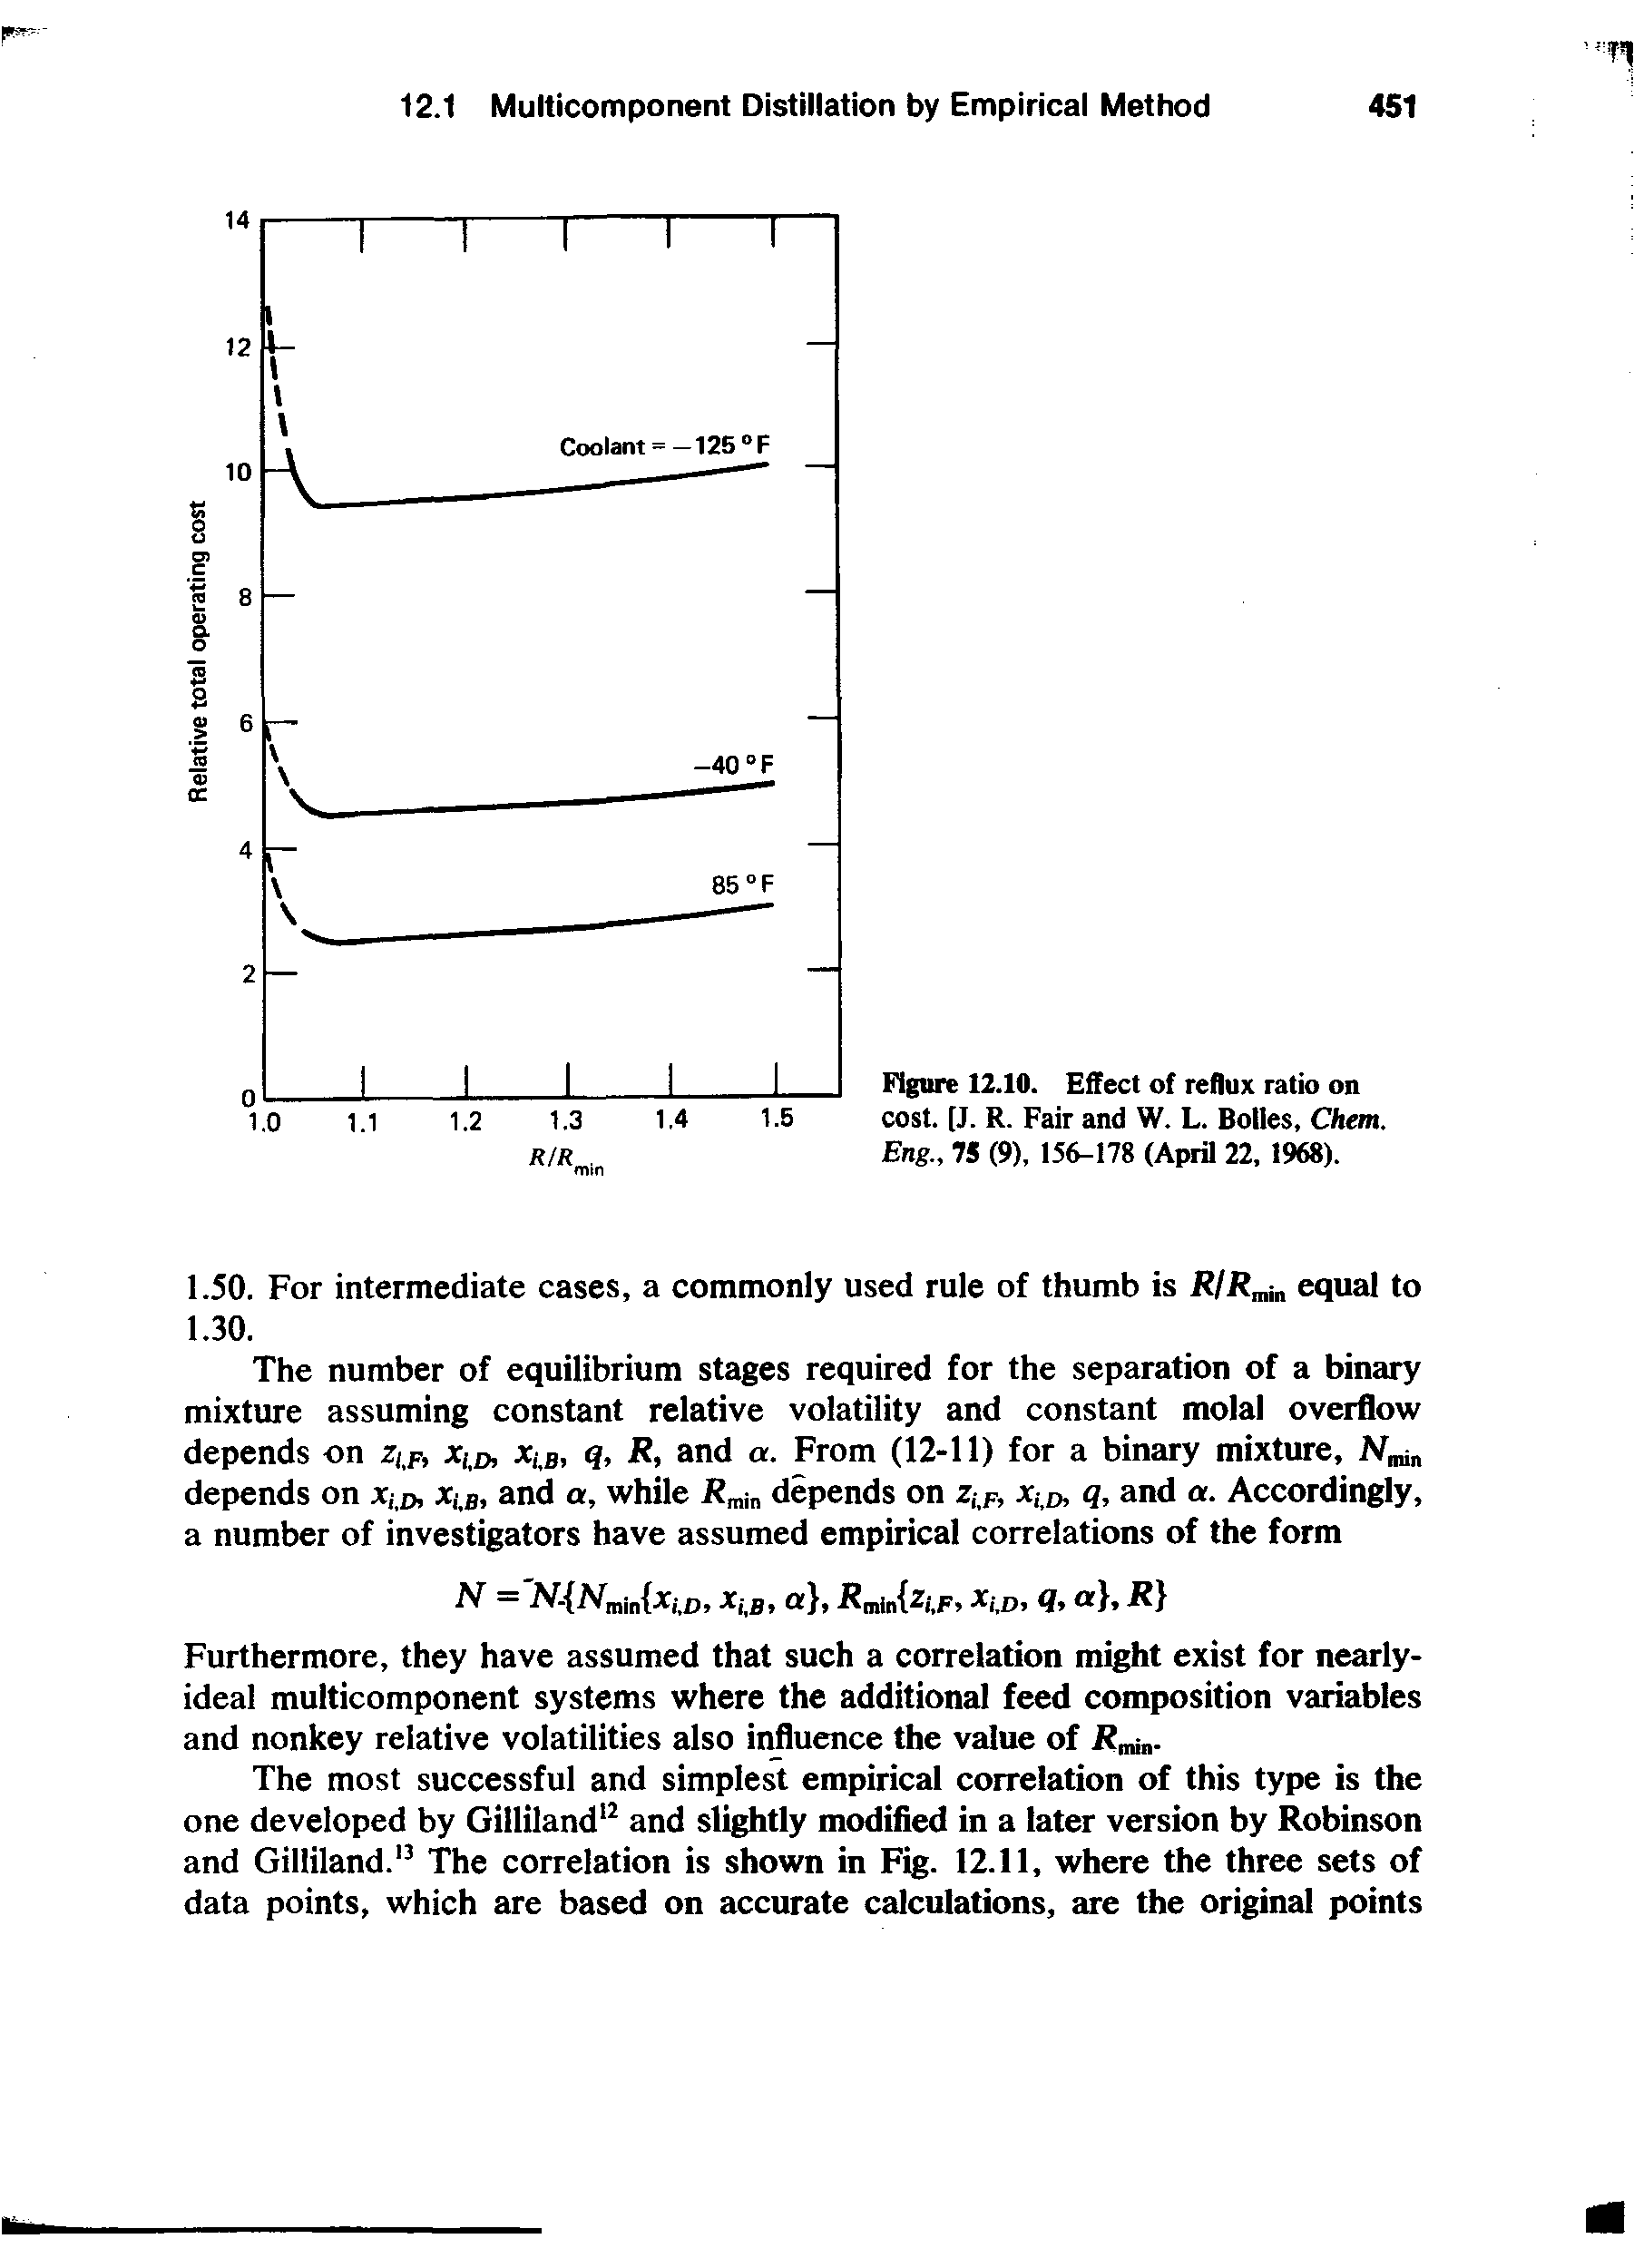 Figure 12.10. Effect of reflux ratio on cost. [J. R. Fair and W. L. Botles, Chem. Eng., 75 (9), 156-178 (April 22, 1968).